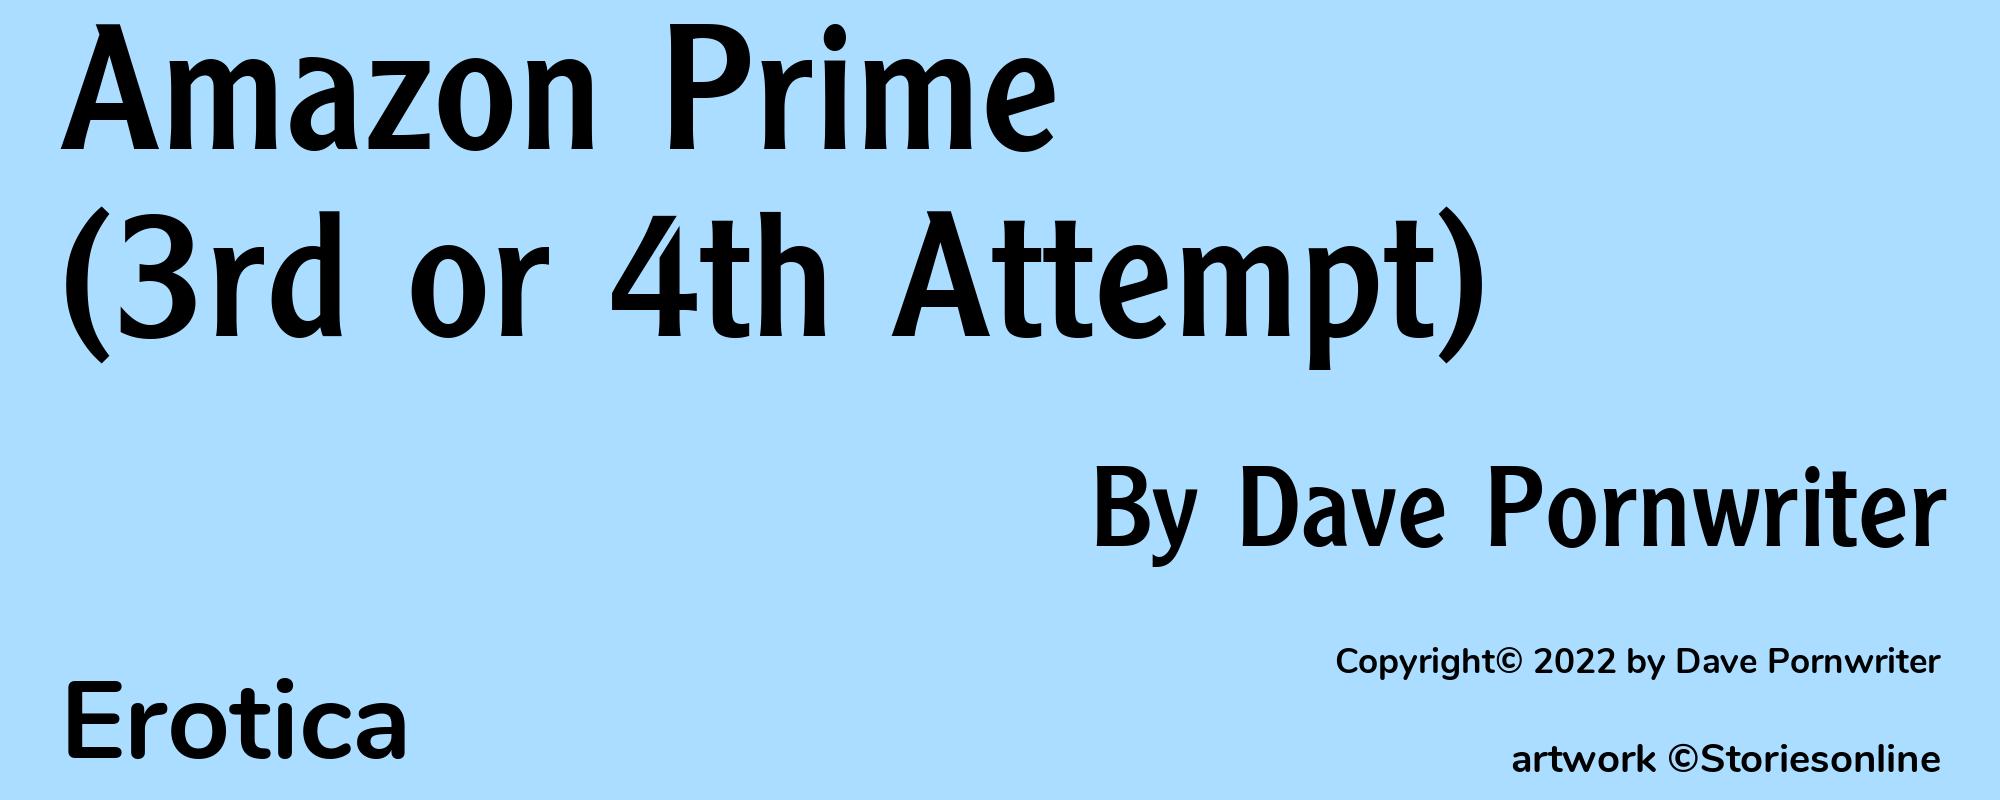 Amazon Prime (3rd or 4th Attempt) - Cover